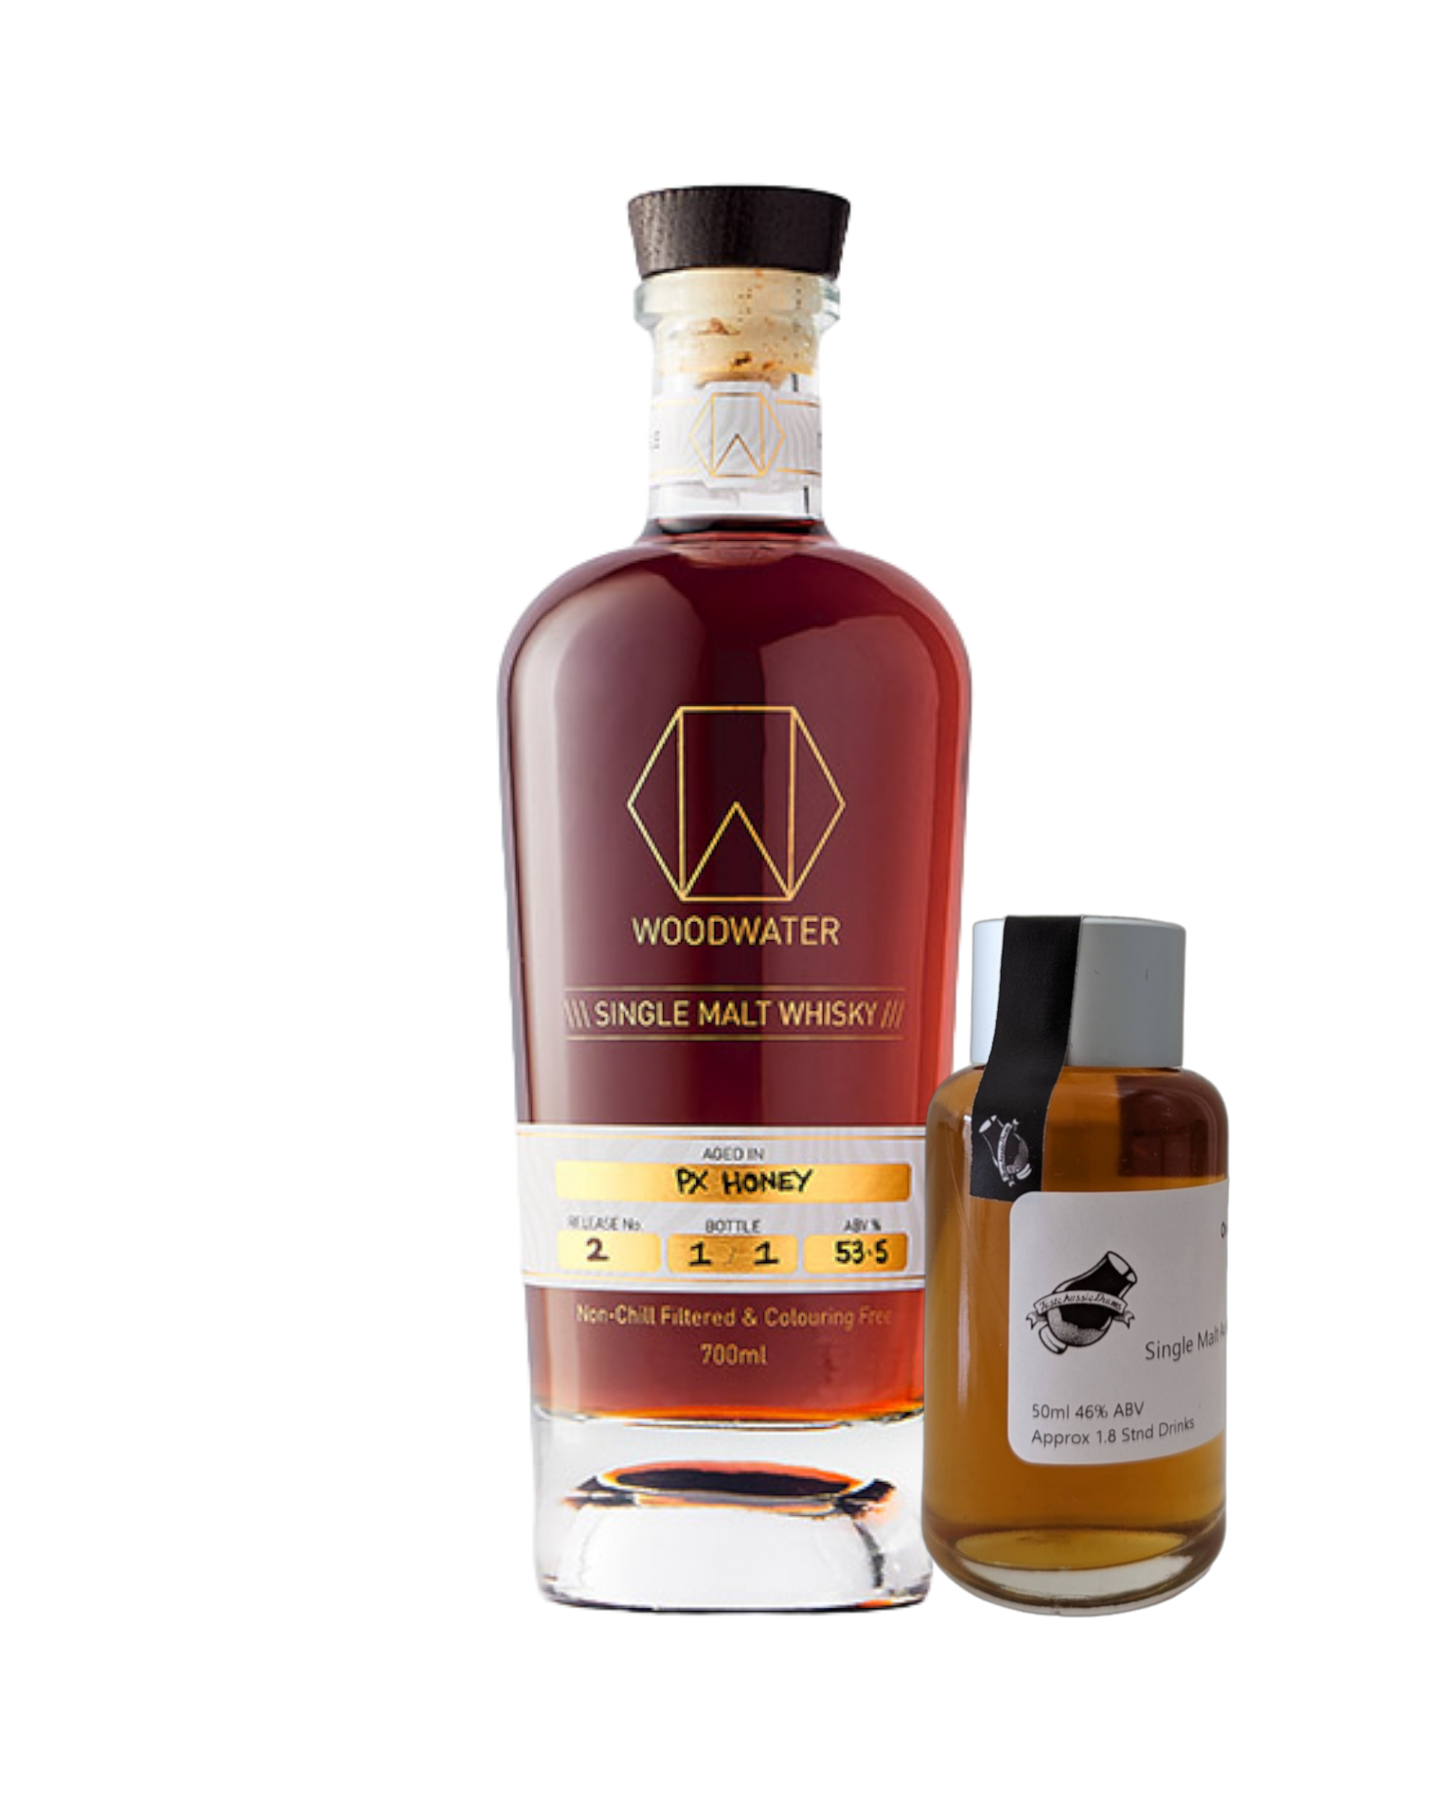 Woodwater Whisky 'Release #2 PX Honey' Various Size Samples